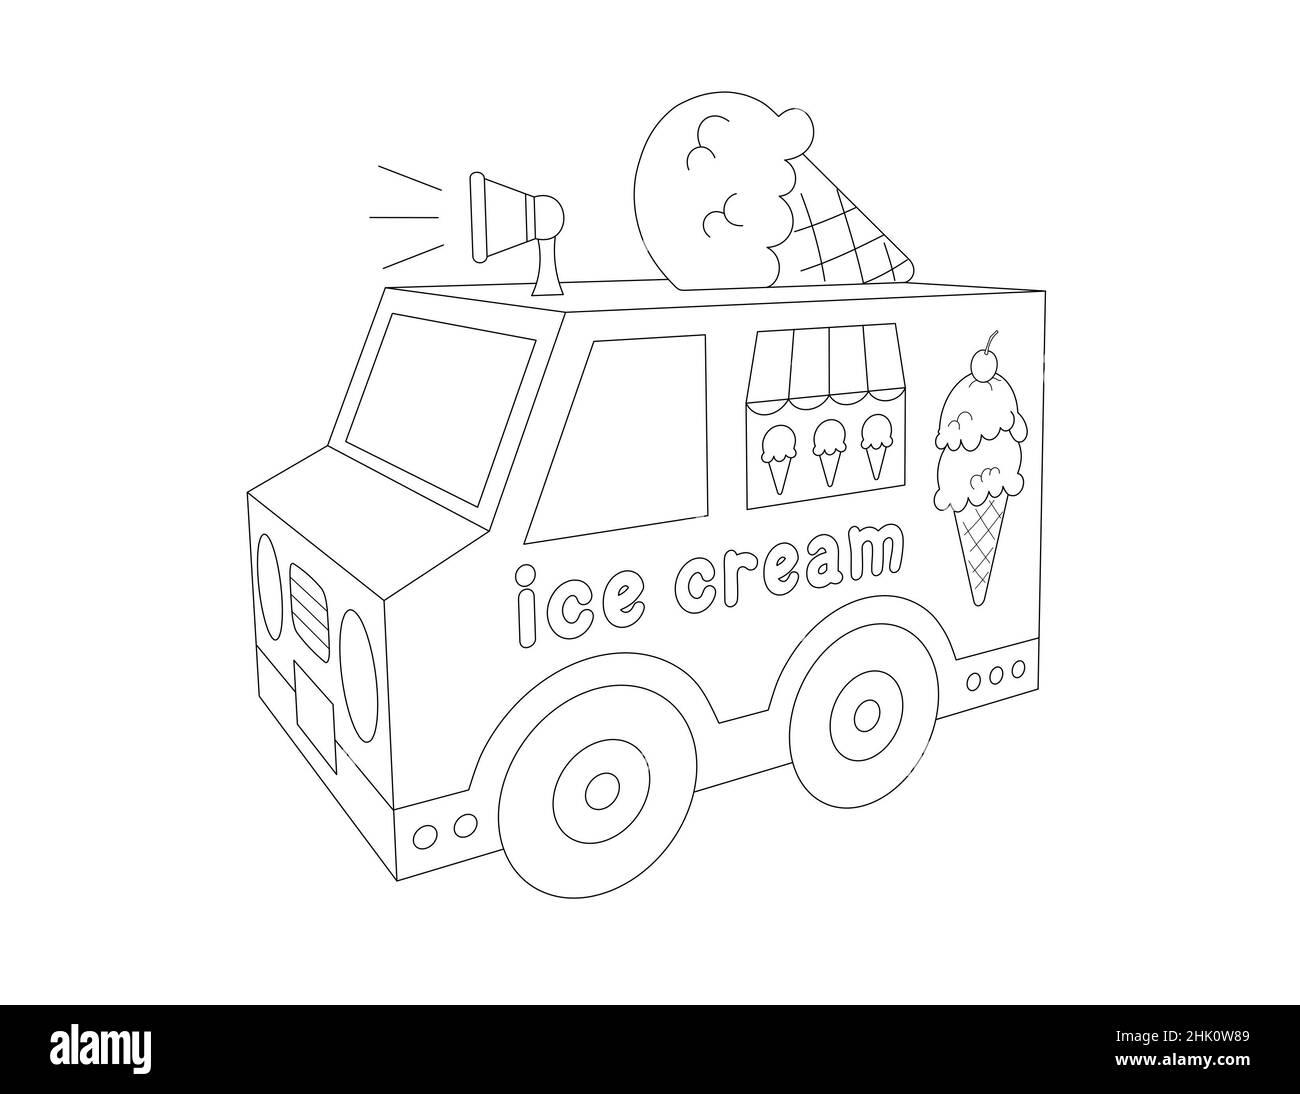 3d model of an ice cream truck, black and white perspective view illustration Stock Photo